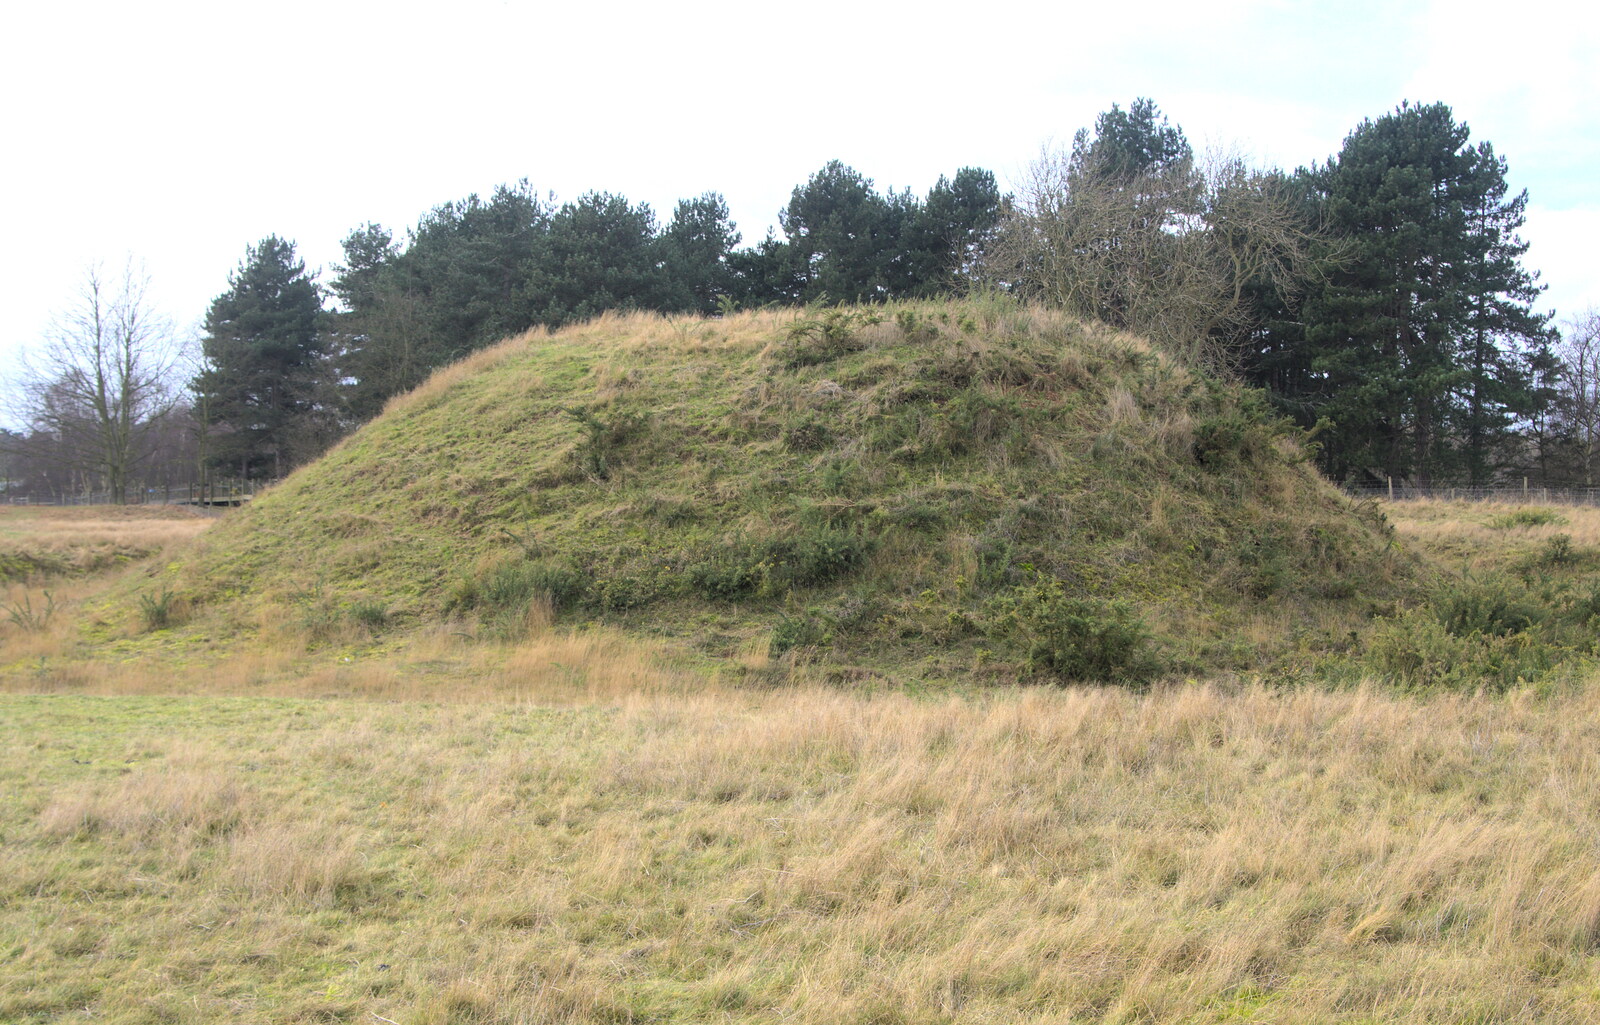 Another Sutton Hoo Tumulus from A Trip to Sutton Hoo, Woodbridge, Suffolk - 29th January 2017